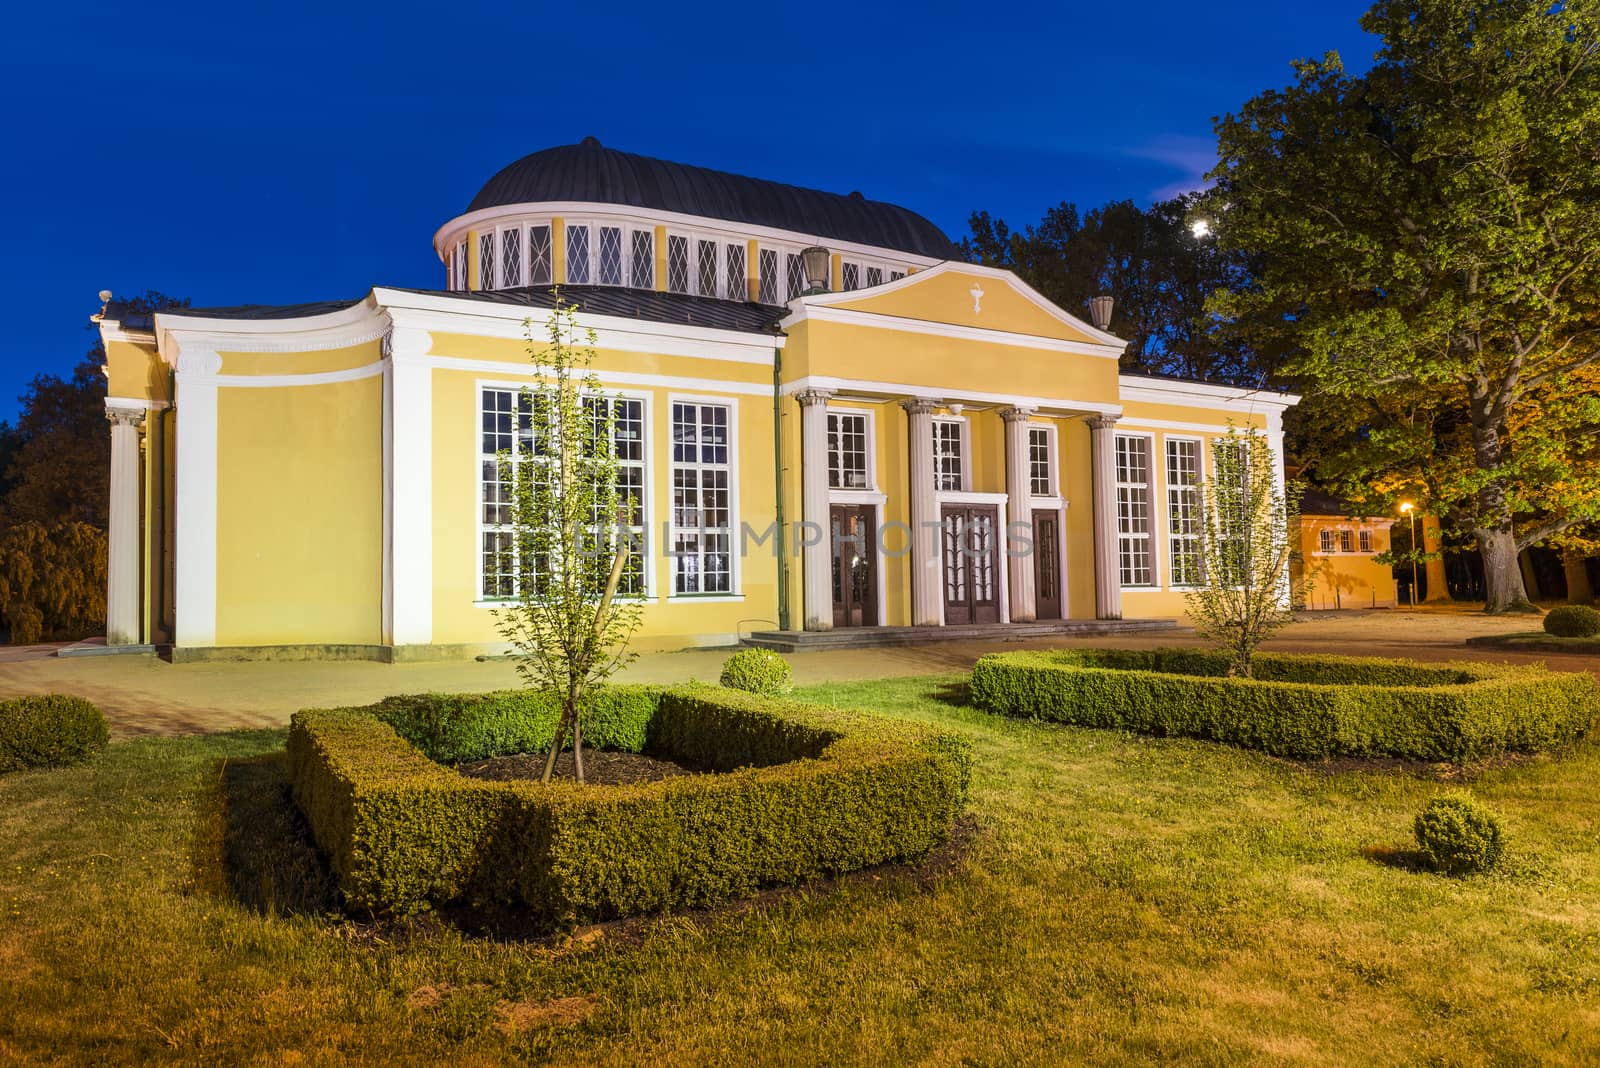 Glauber Pavilion which houses Glauber mineral springs in Frantiskovy Lazne Spa town in the North Czech Republic.